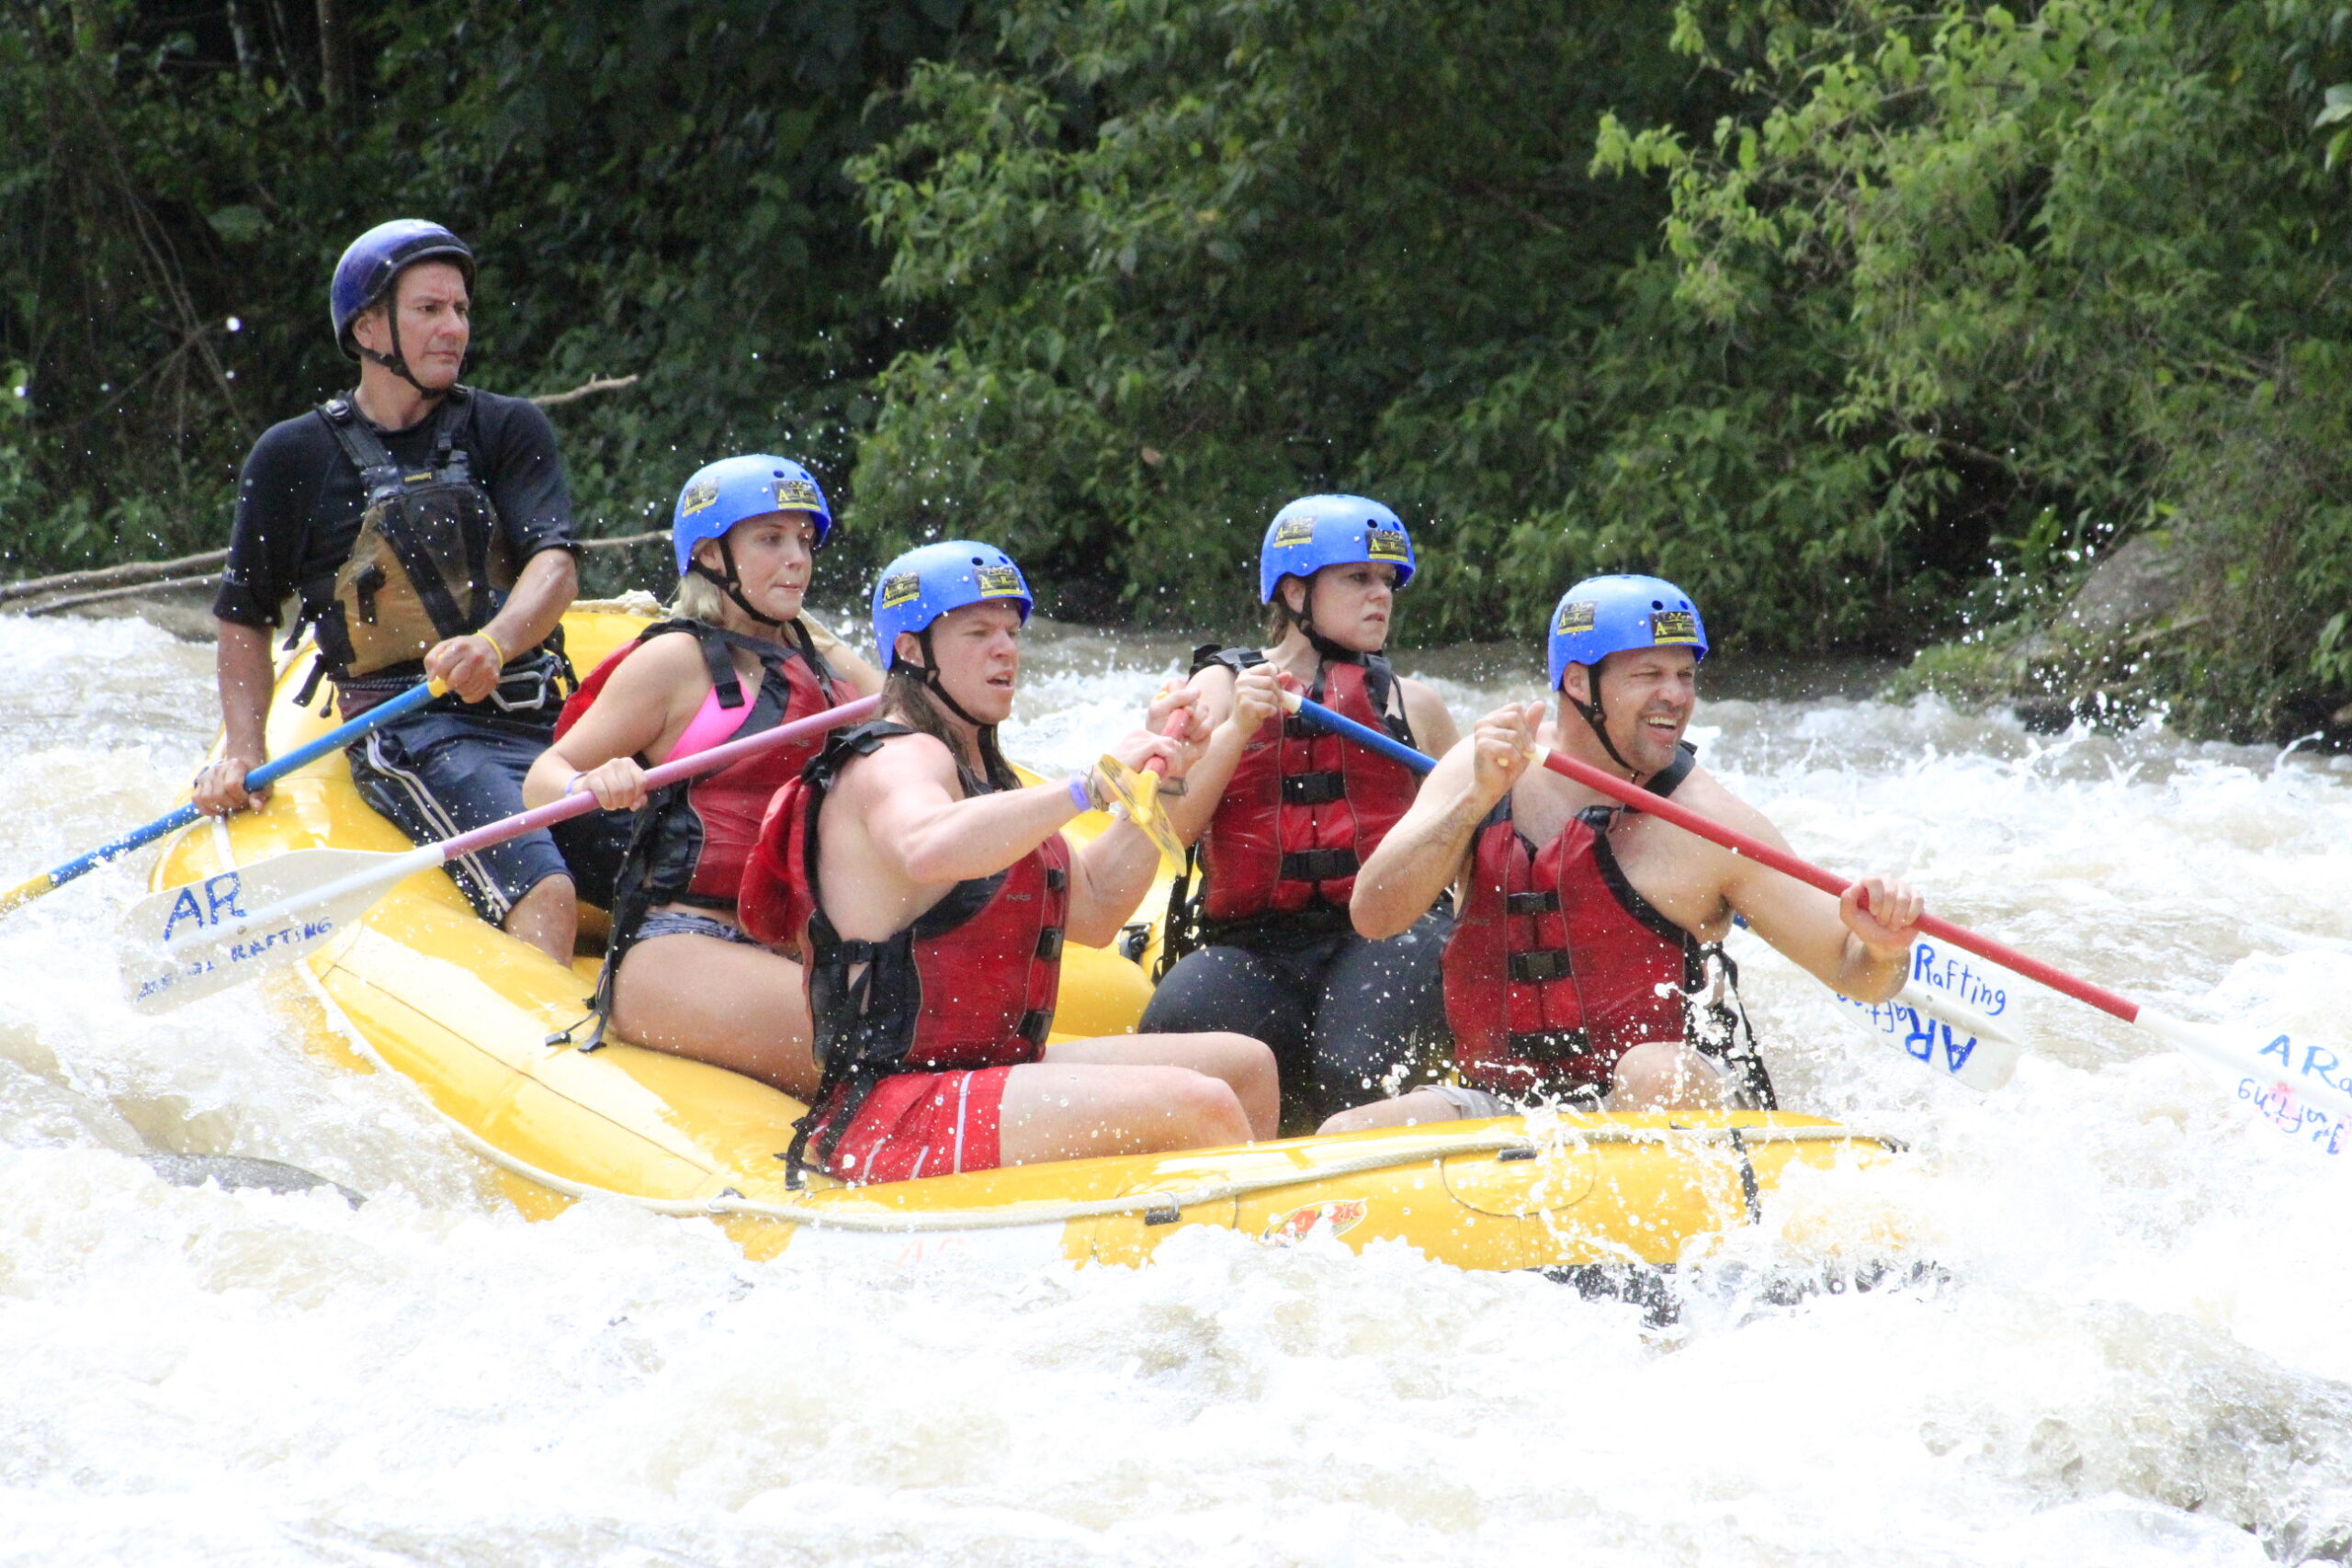 a group of 5 people on a yelloow raft in a river in Costa Rica 